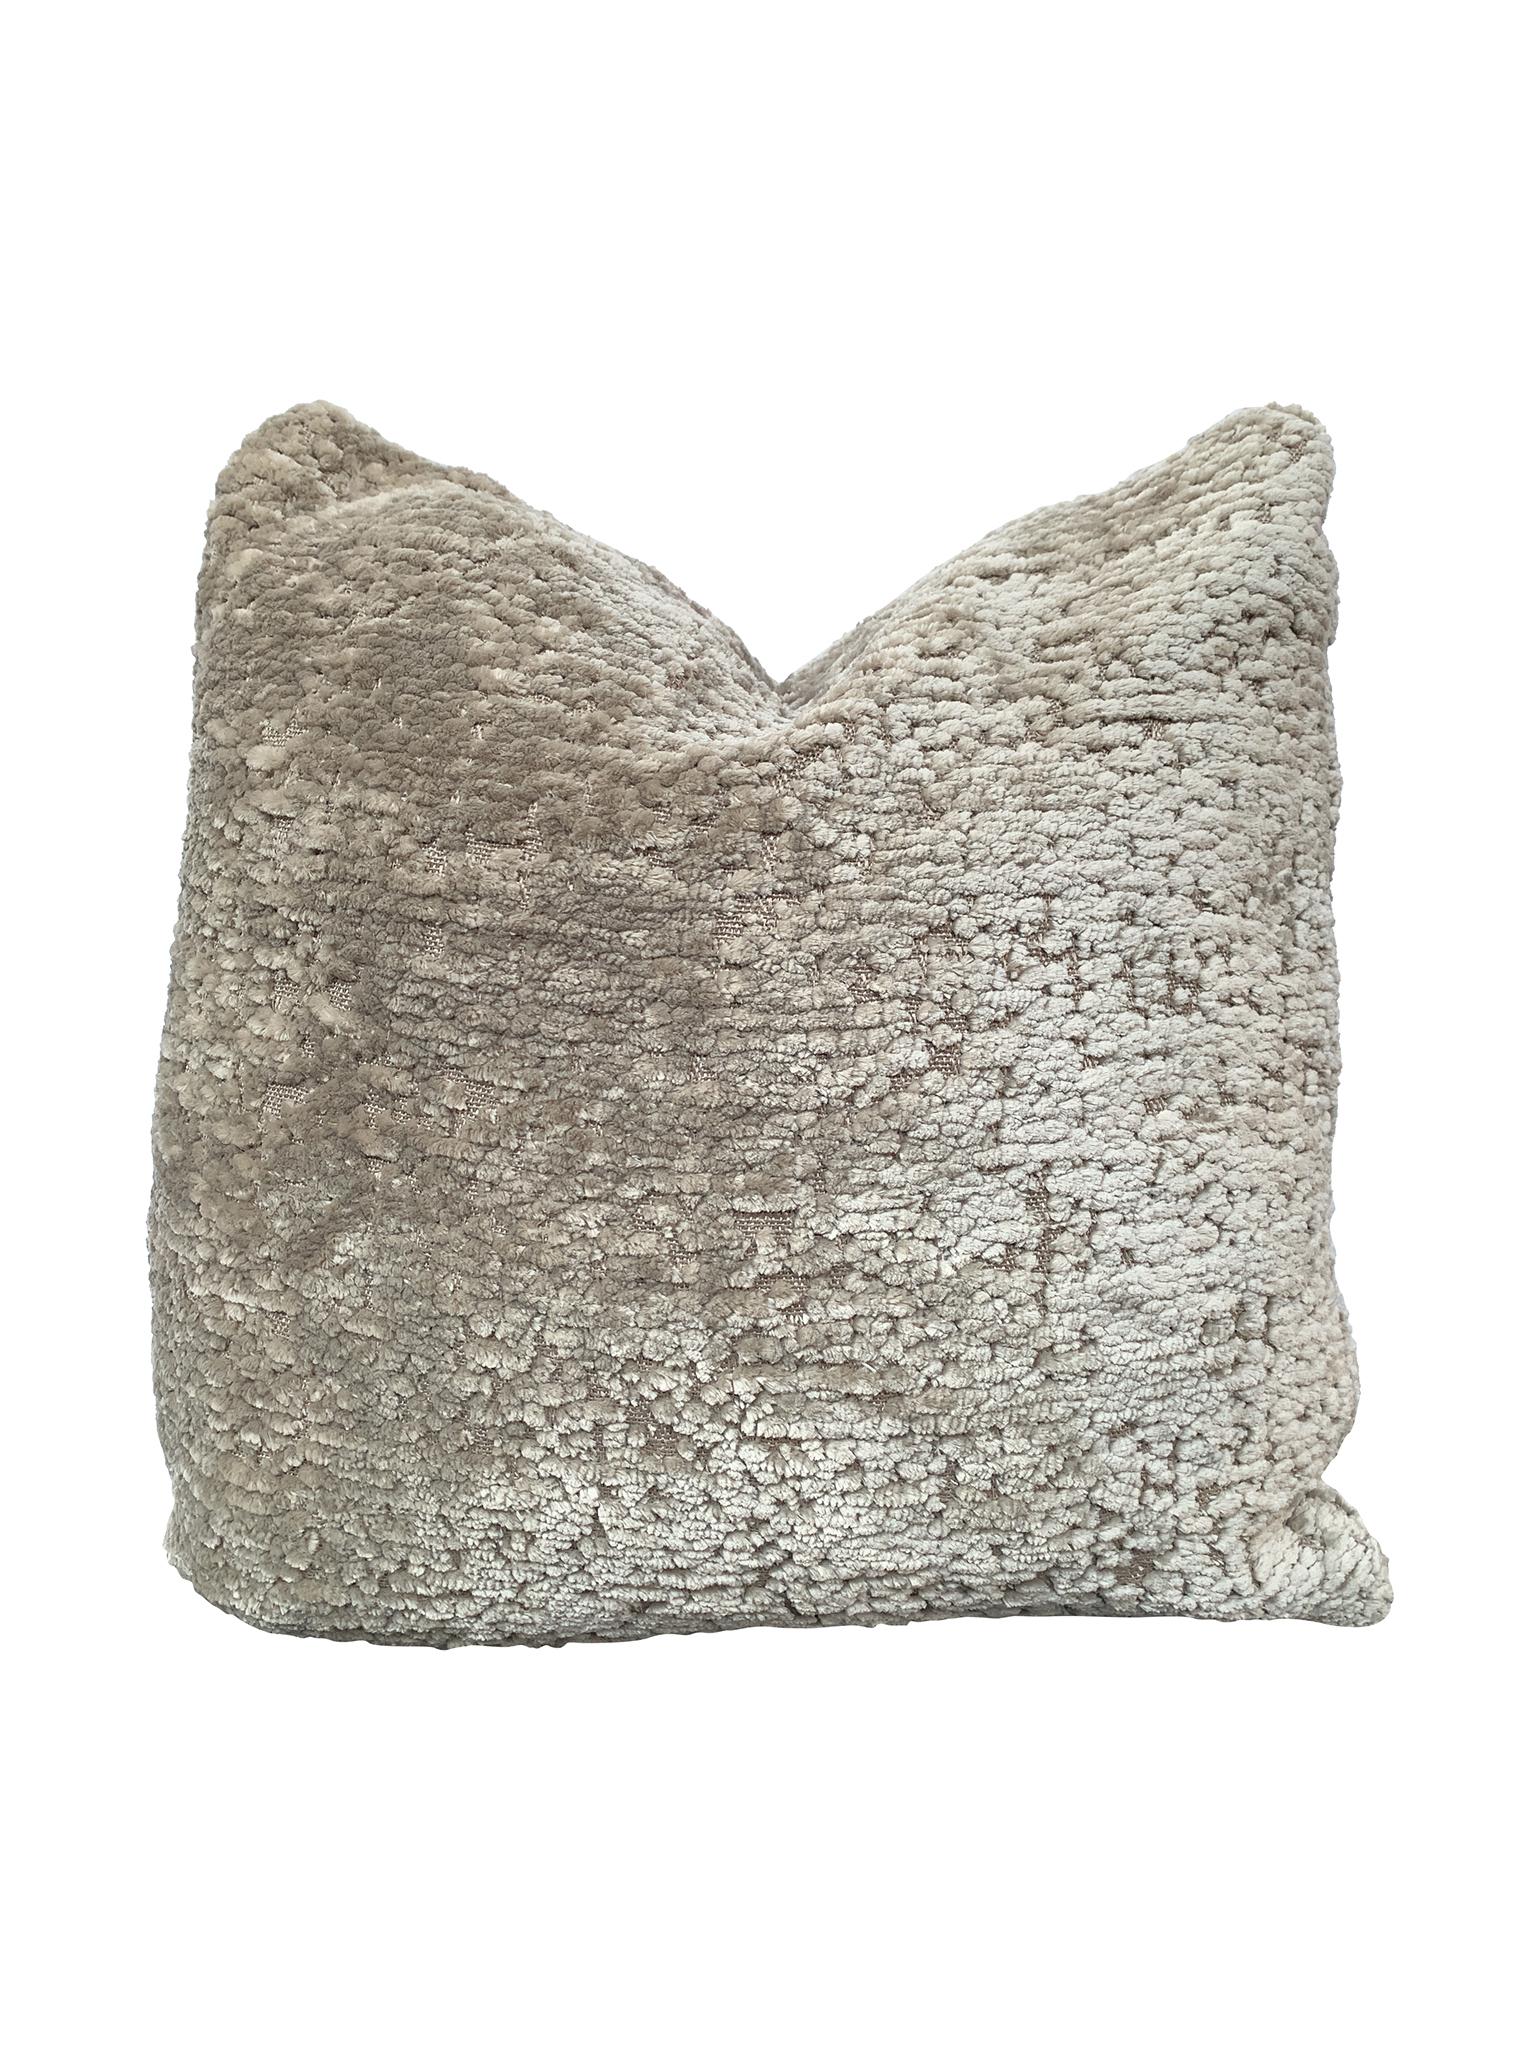 Cozy, custom-made pillow with a soft silk-and-cashmere fabric in an oyster gray colorway from S. Harris. The pillow is small in size and square in shape. The filling is a combination of Dacron and down, very comfortable and perfect for